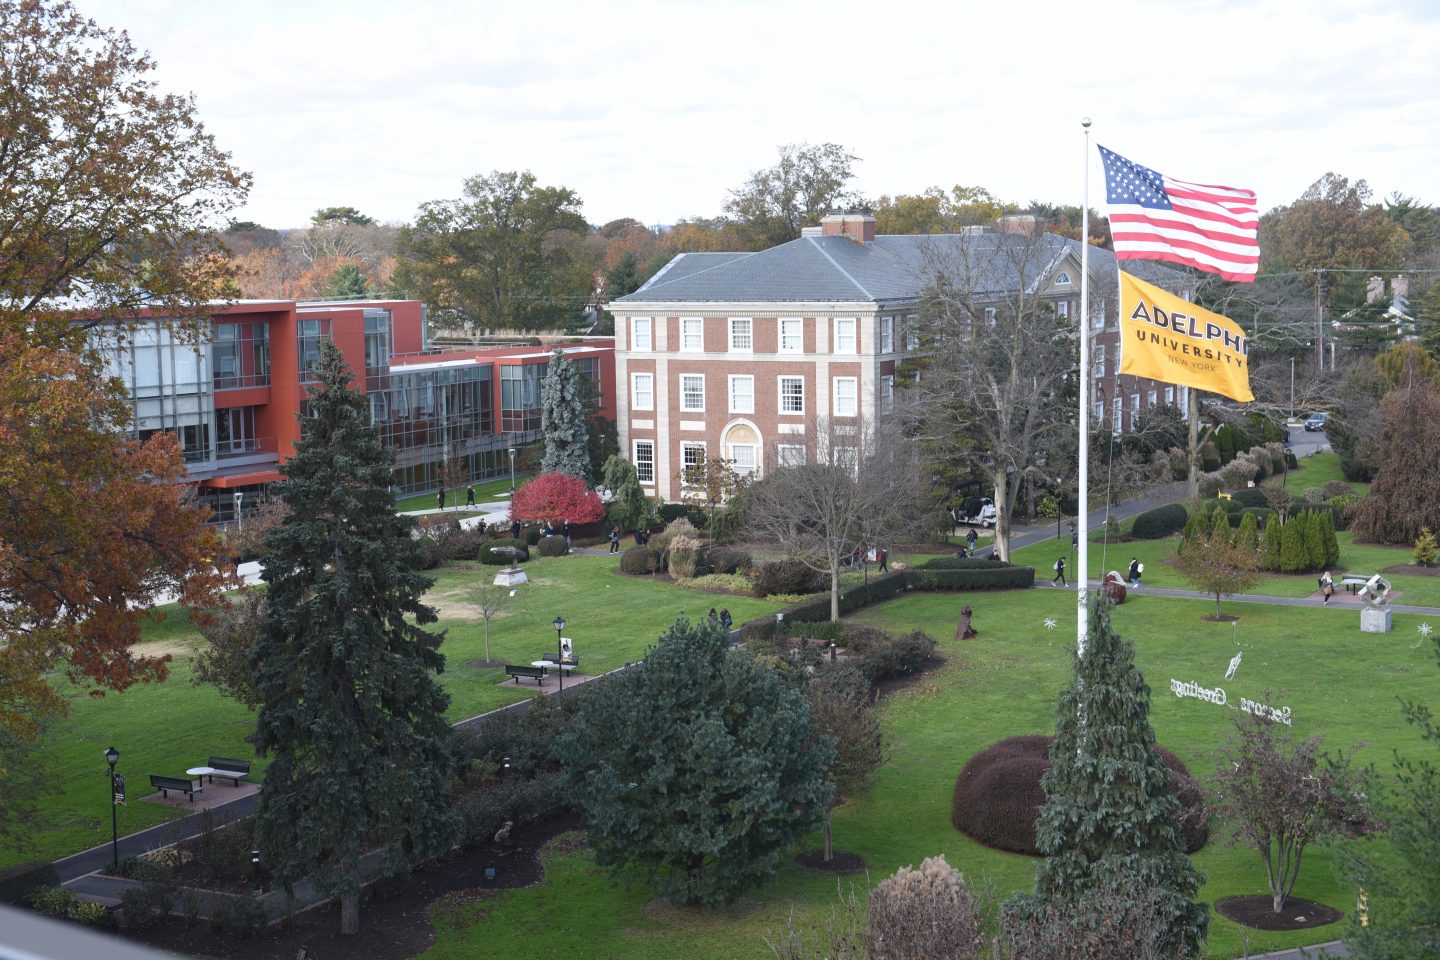 Aerial view of 依依社区, Garden City campus - Showing Nexus Building, Levermore Hall and the Flagpole lawn with both American and Adelphi flags waving.